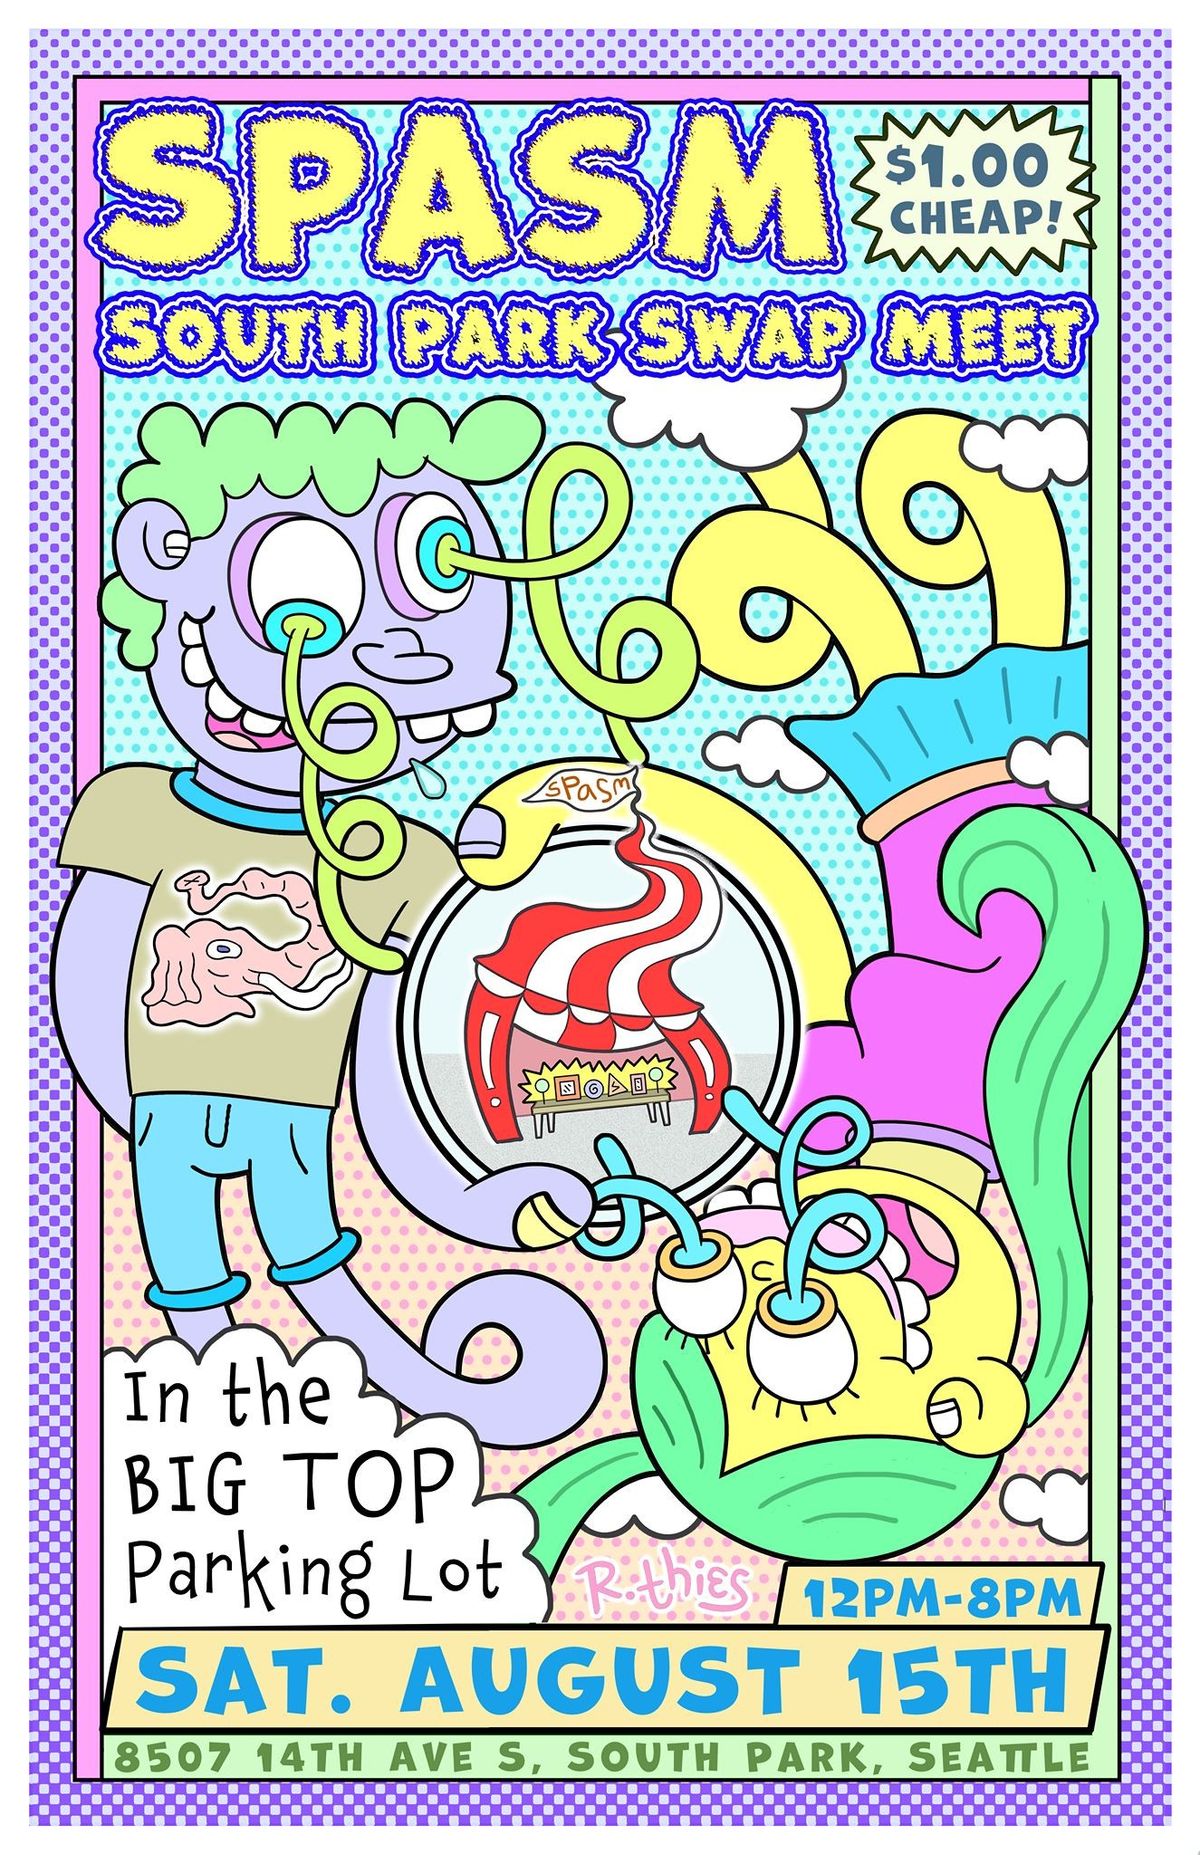 Spasm! The South Park Swap Meet! at Big Top Curiosity Shop in Seattle, WA -  Saturday, July 11, 2020 - EverOut Seattle